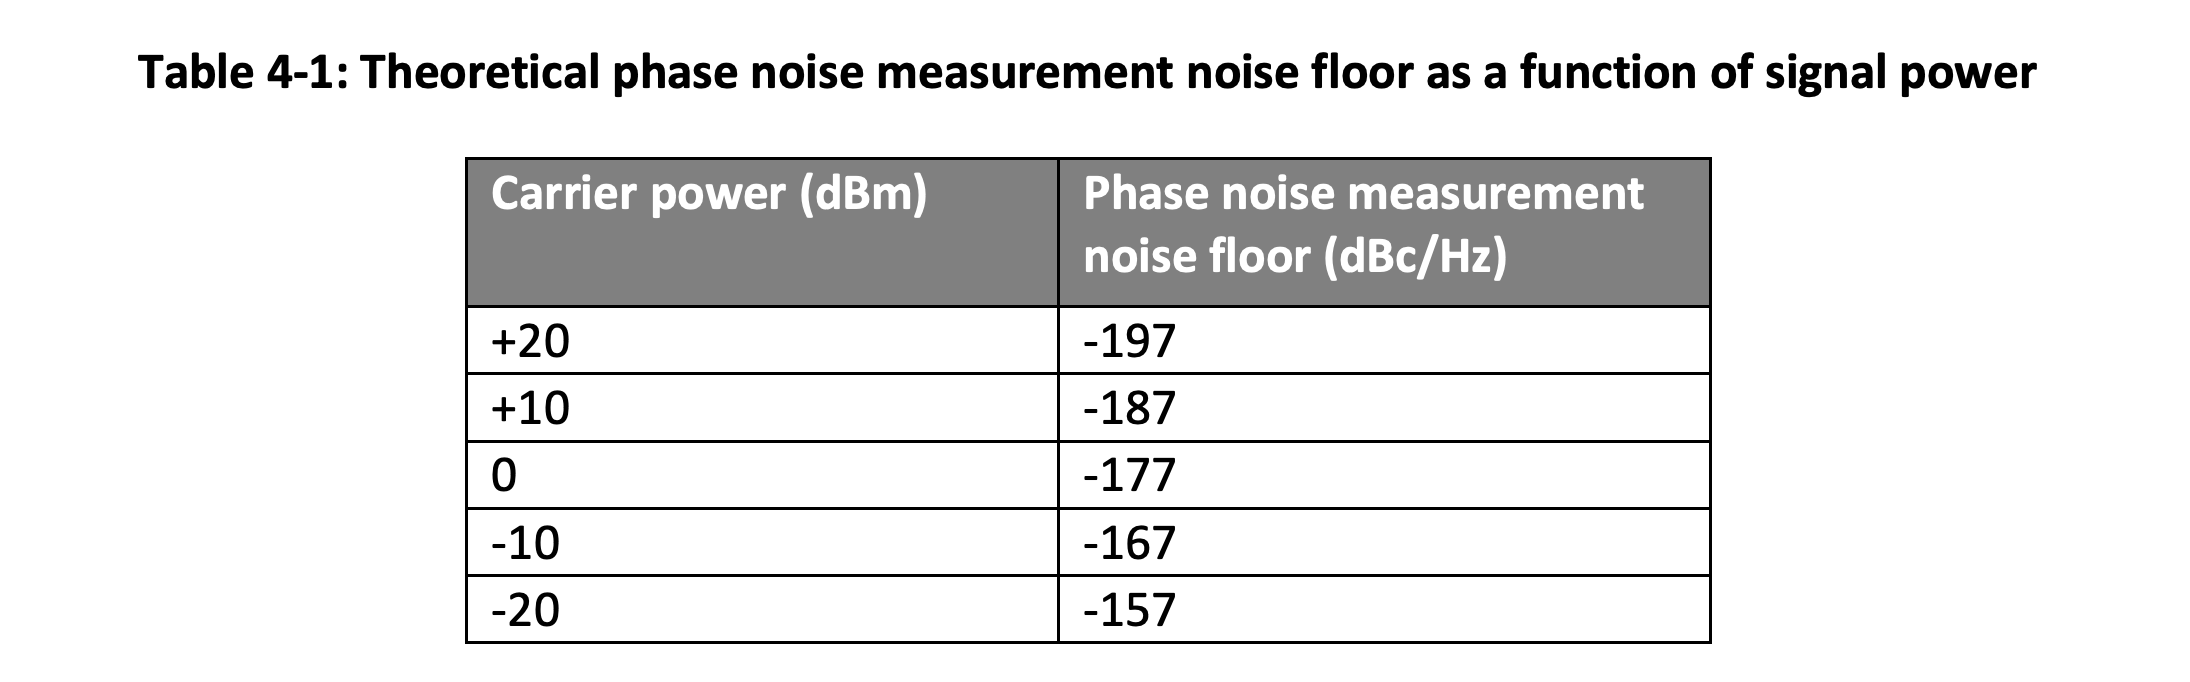 Table 4-1 Theoretical Phase Noise Measurement Noise Floor as a Function of Signal Power